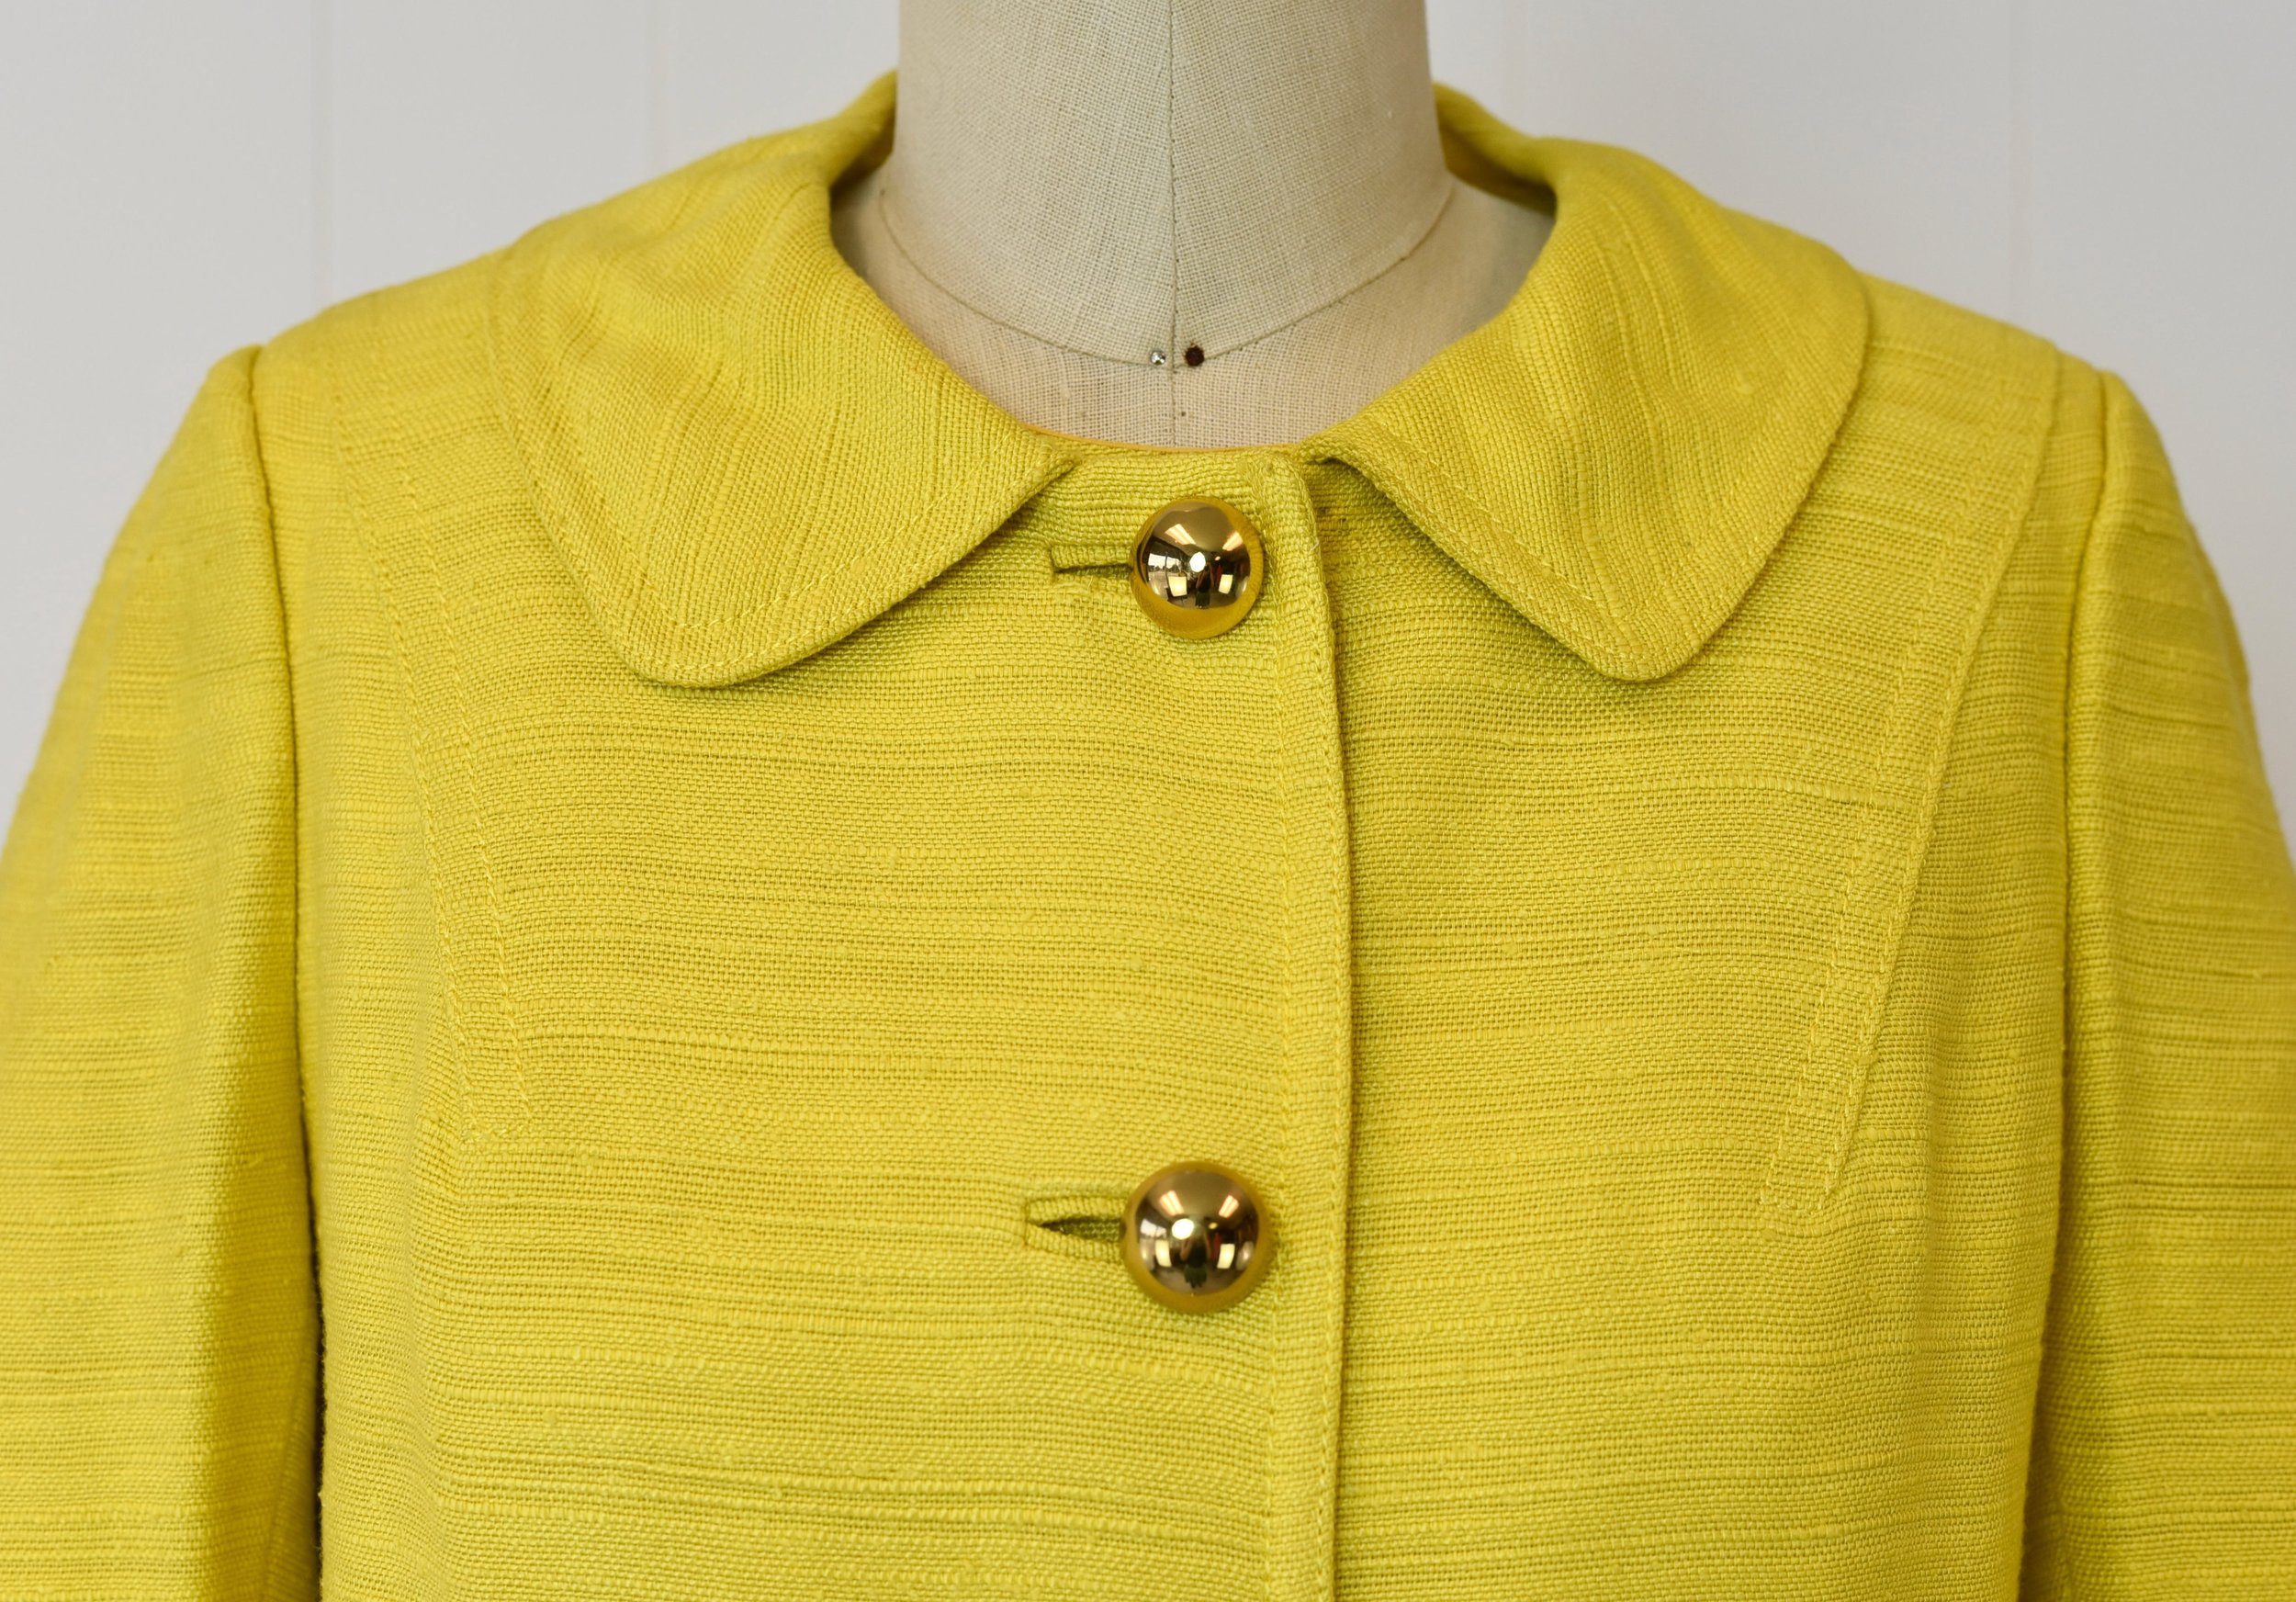 1960s Louis Feraud Yellow Dress & Jacket Two Piece Set — Canned Ham Vintage